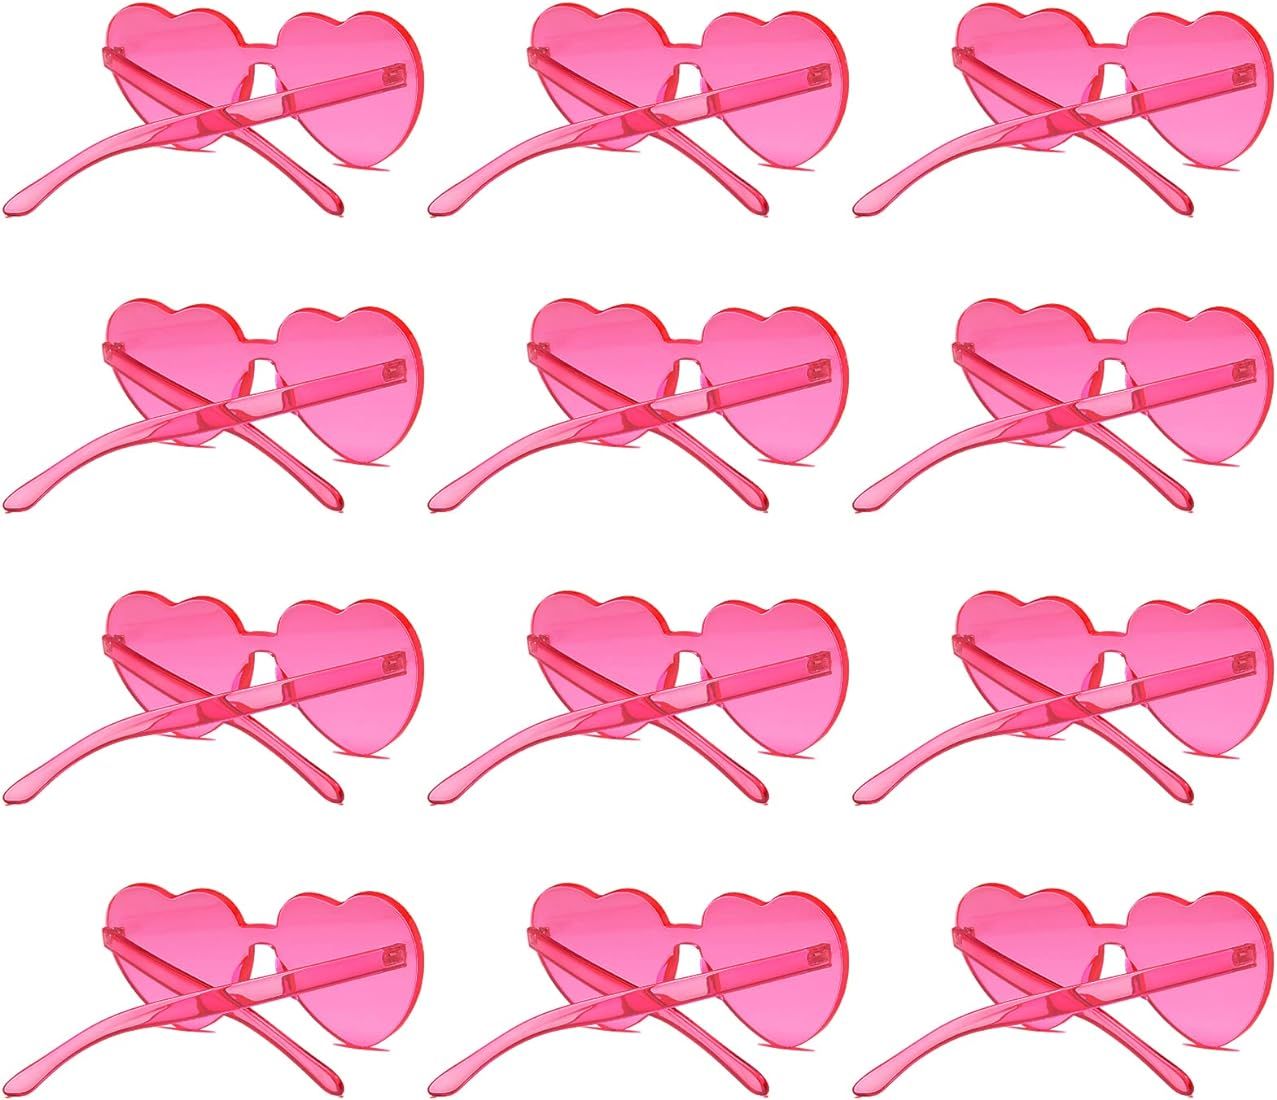 LIULIUBTY Heart Shaped Rimless Sunglasses, Bachelor Party Cool Sunglasses 12Pack, Colorful Funky ... | Amazon (US)